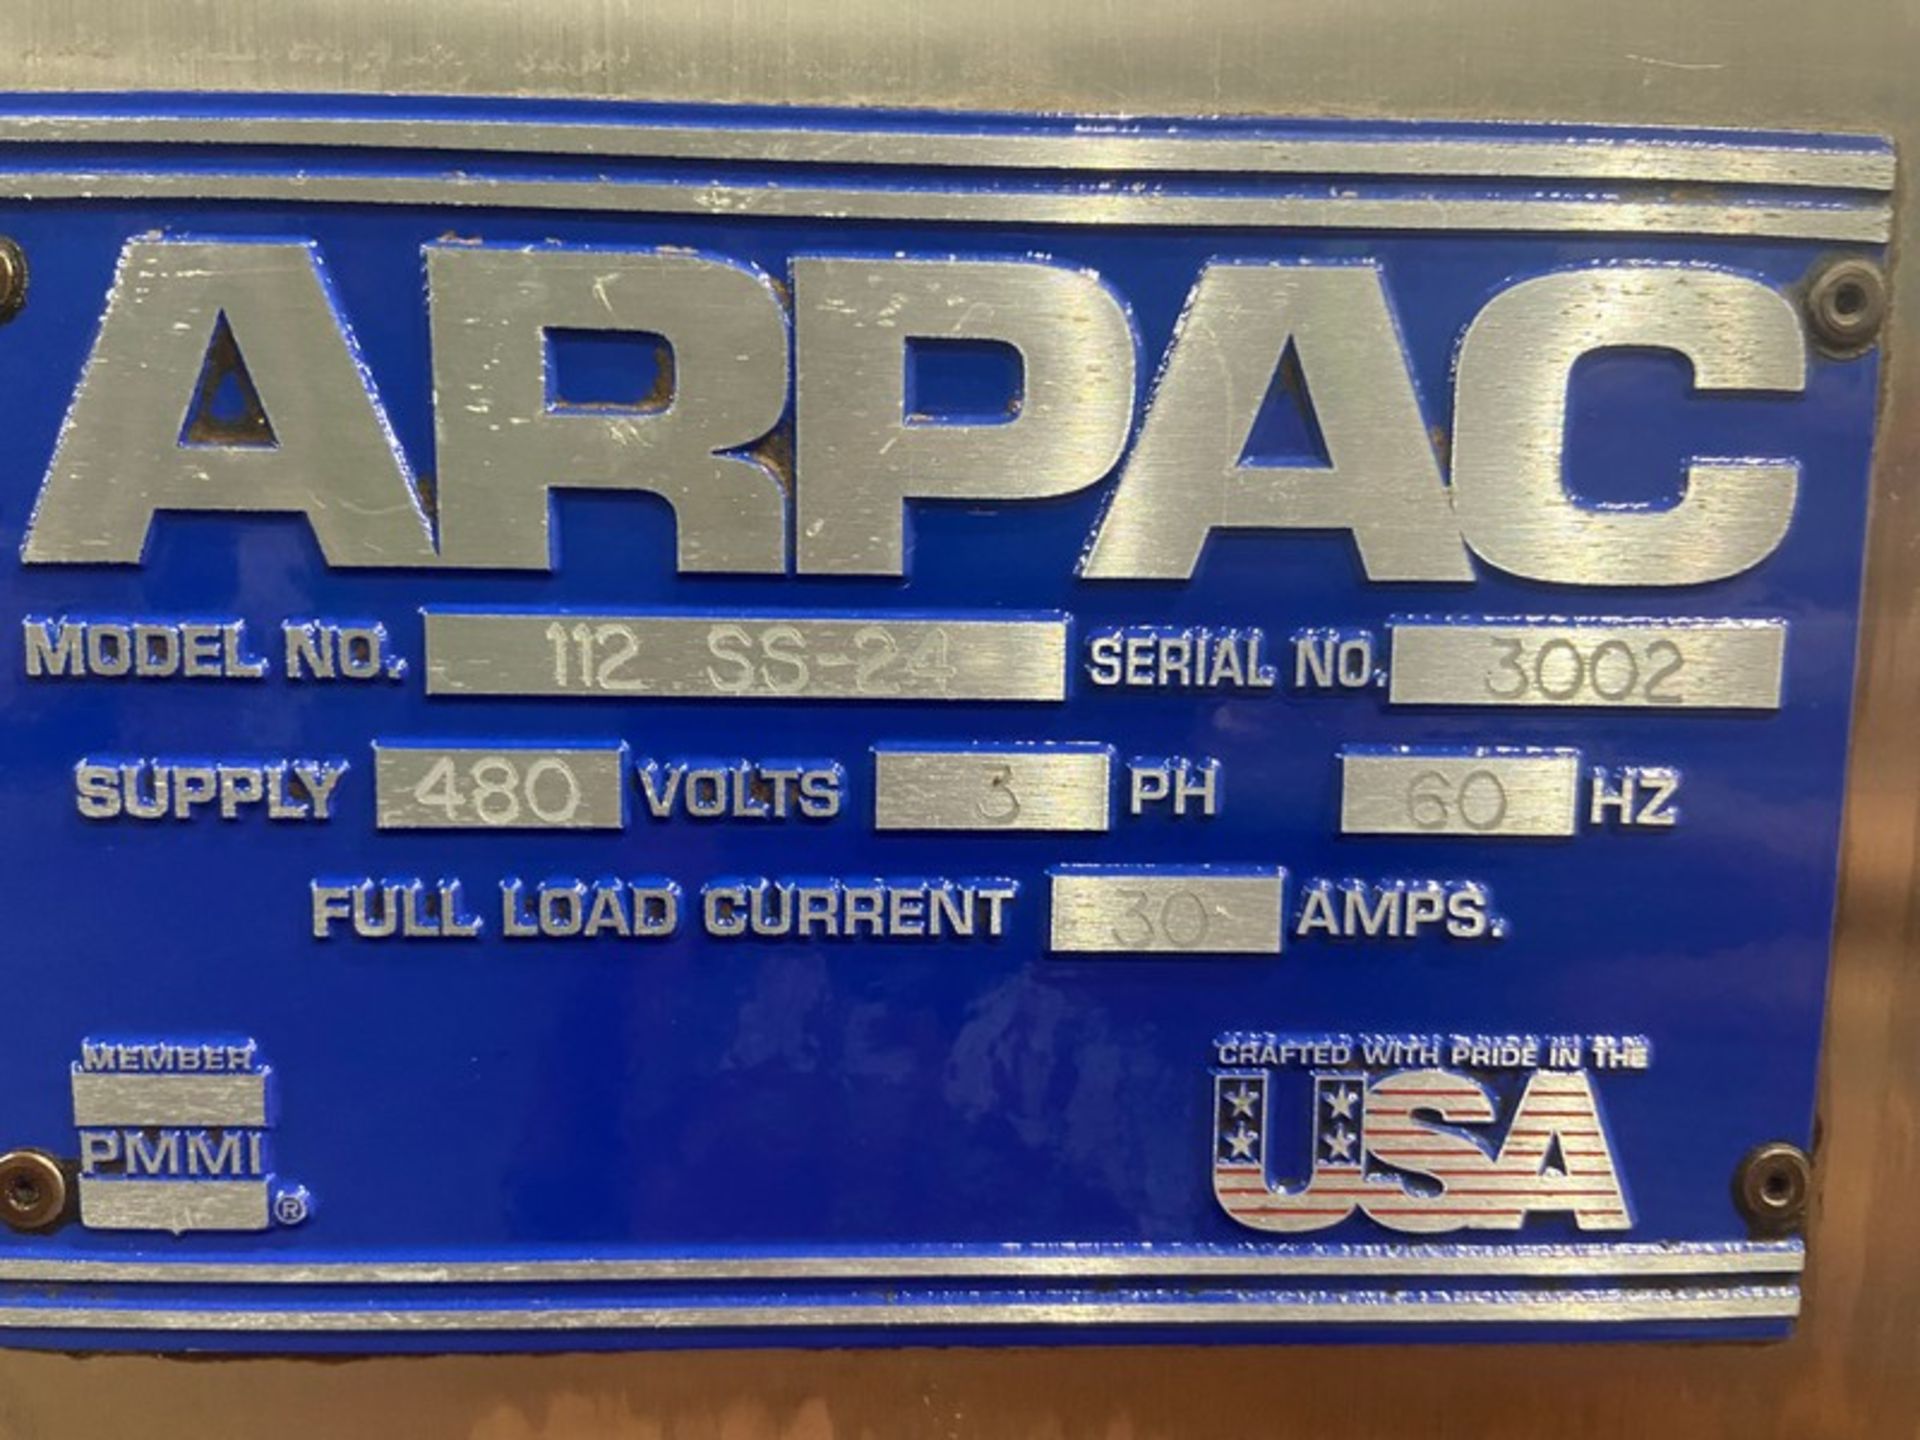 ARPAC S/S Shrink Bundler, M/N 112 SS-24, S/N 3002, 480 Volts, 3 Phase, with Aprox. 15" W DIscharge - Bild 10 aus 14